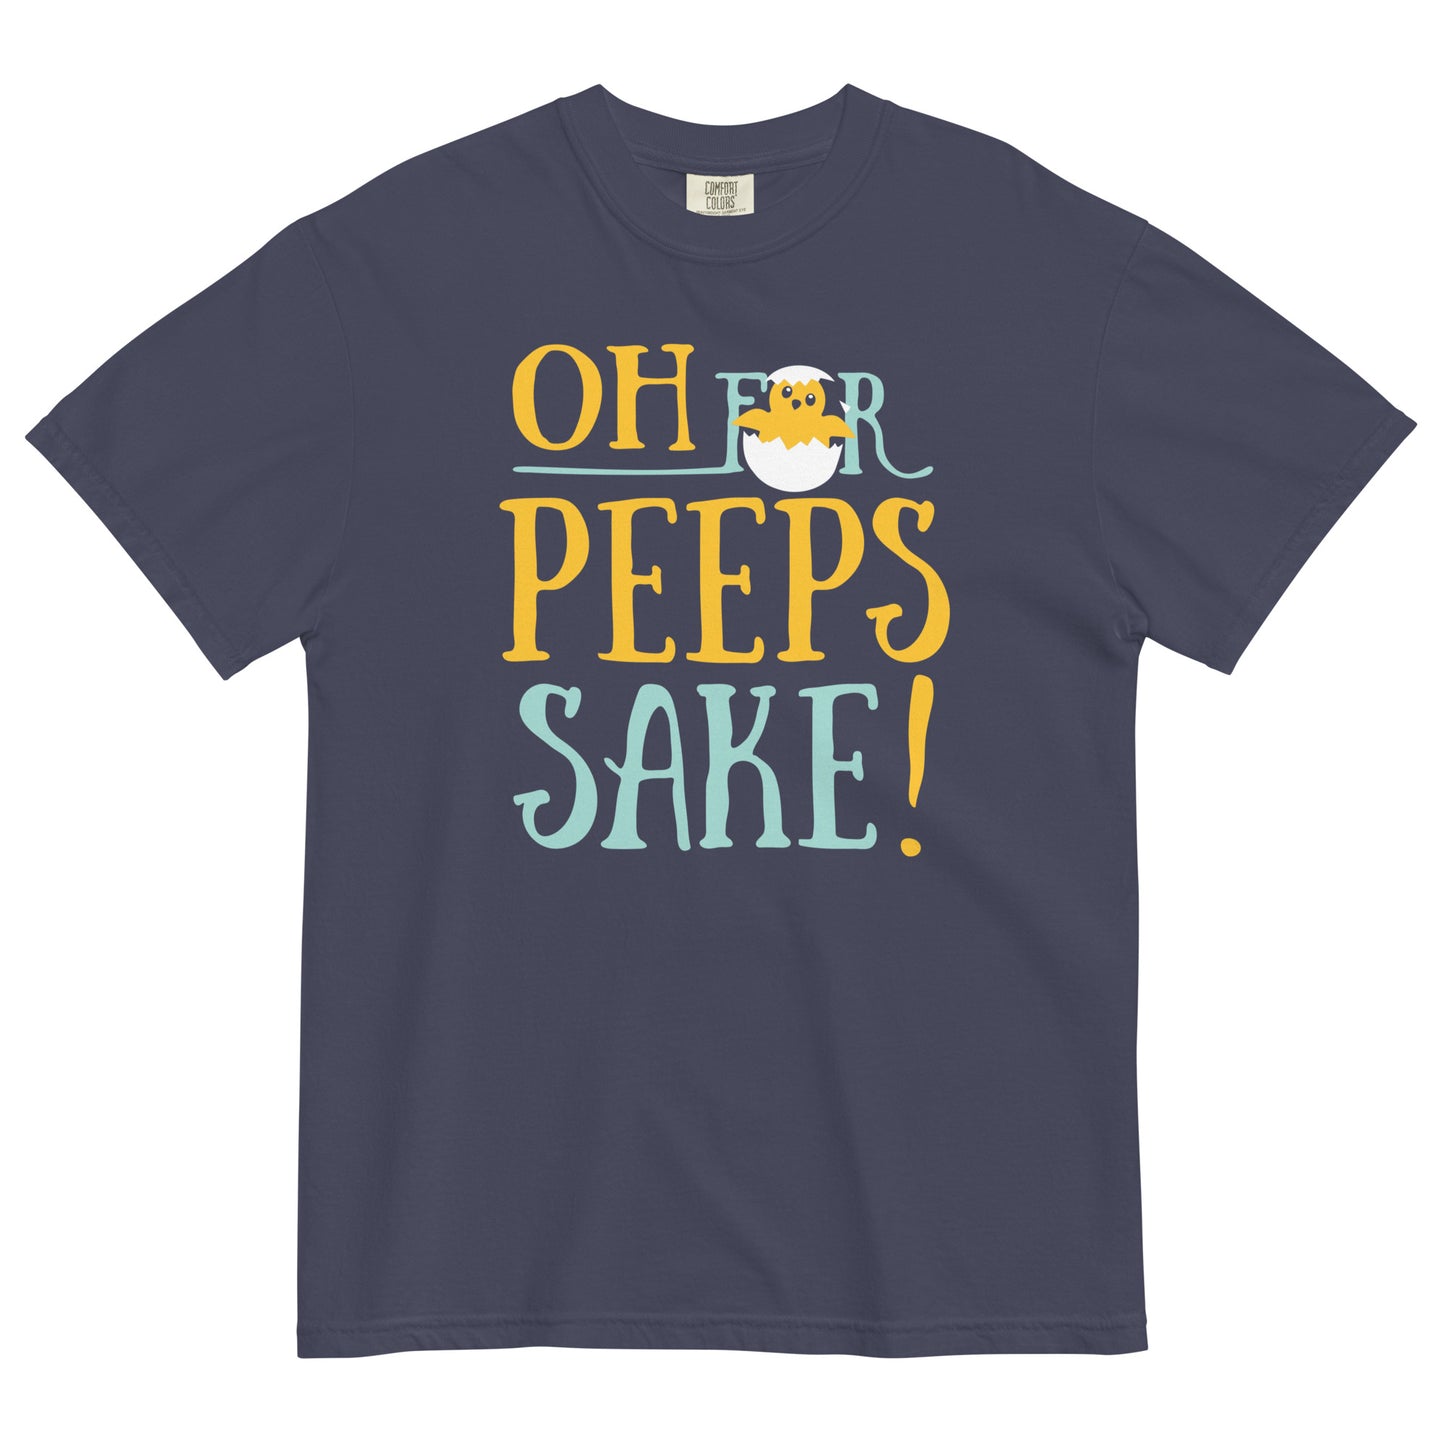 Oh For Peeps Sake Men's Relaxed Fit Tee